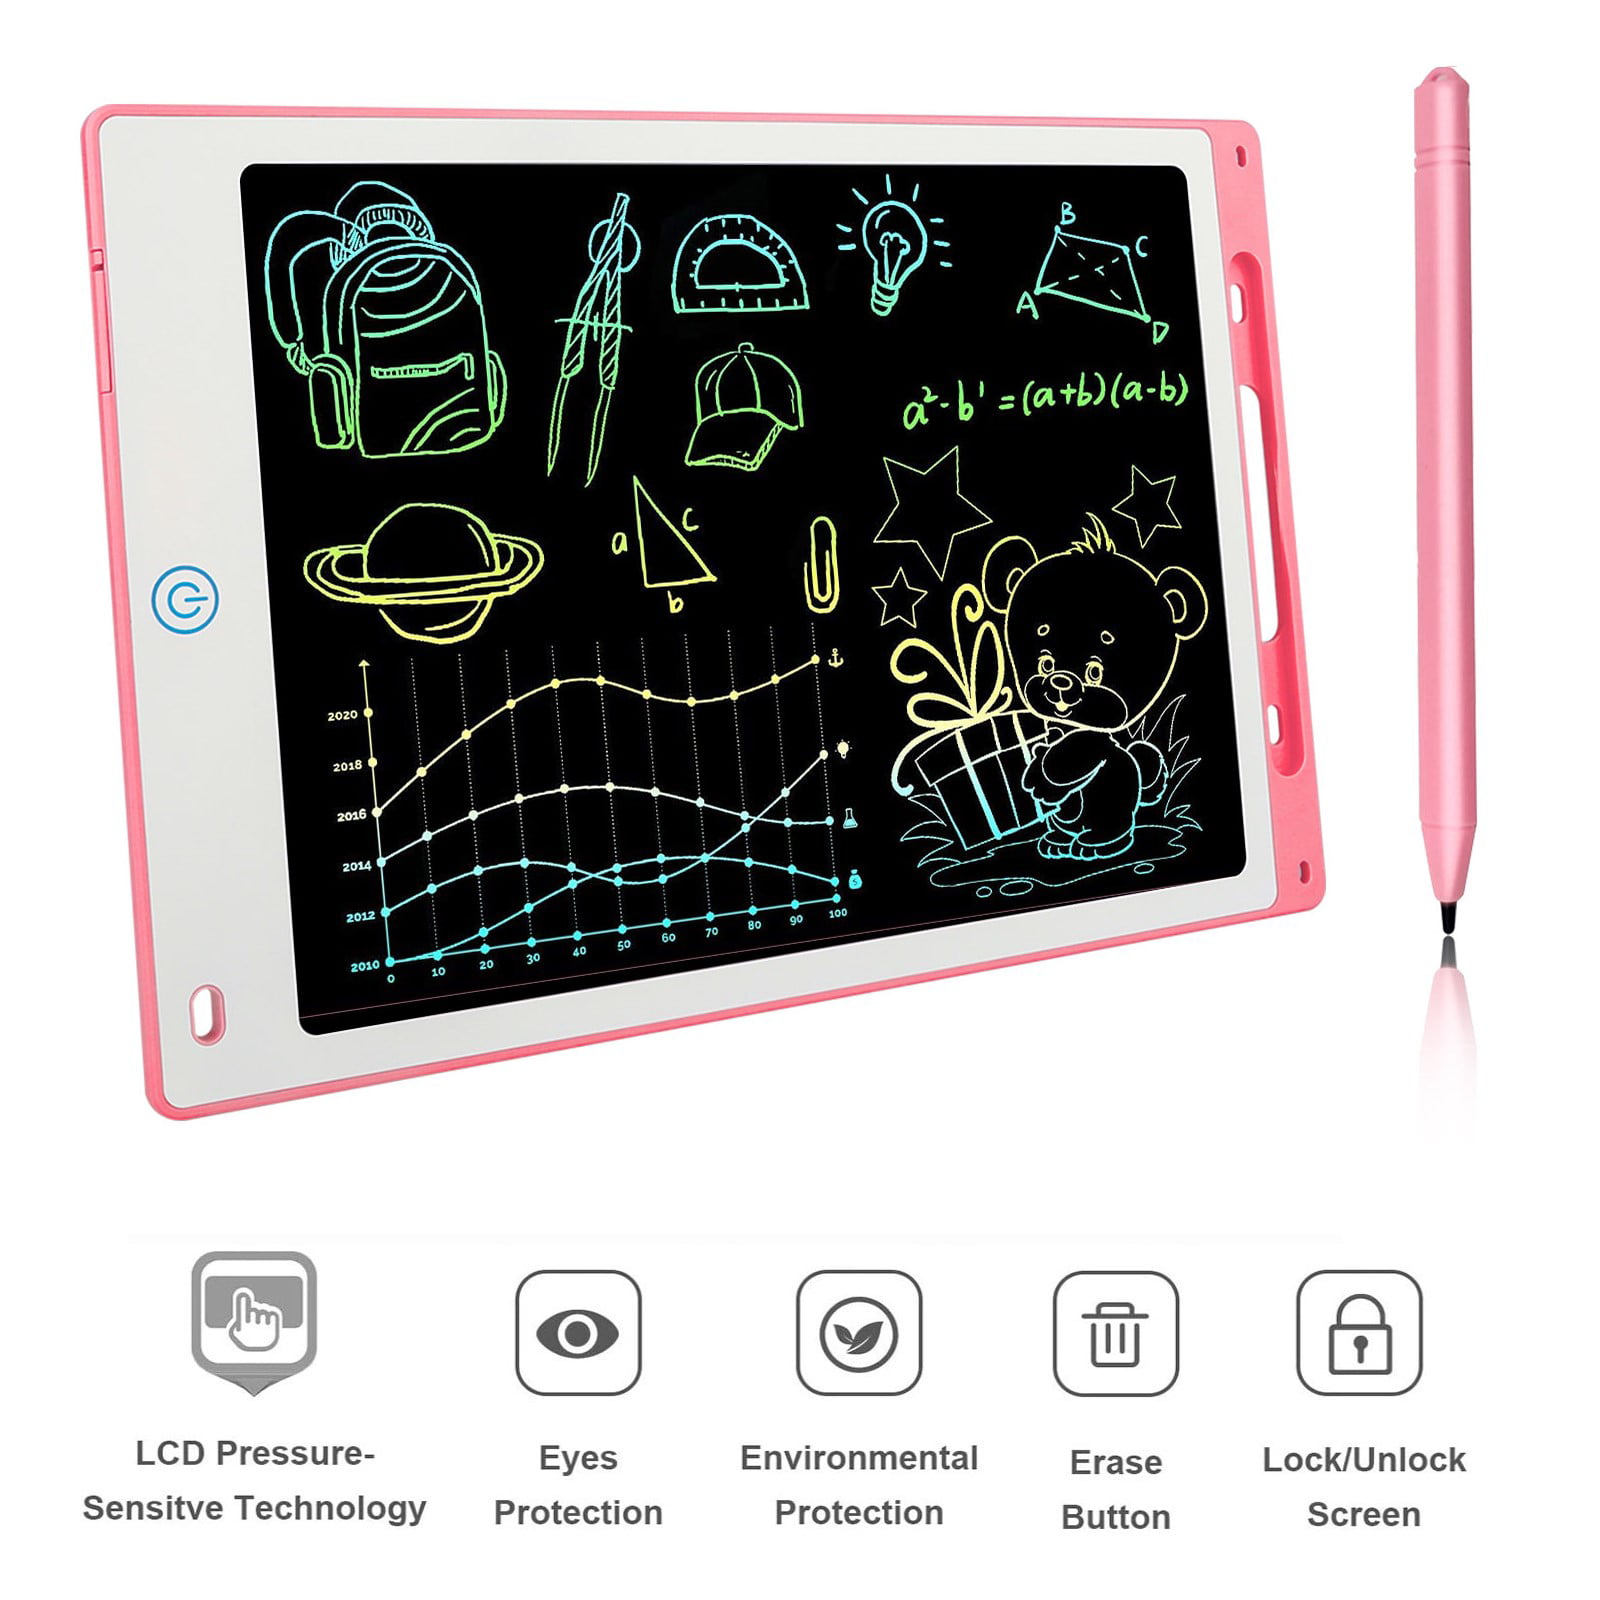 10-inch Color LCD Handwriting Board Schools and Offices Drawing Board LCD Writing Board Suitable for Children and Adults in Homes rewritable and Reusable Writing Board 